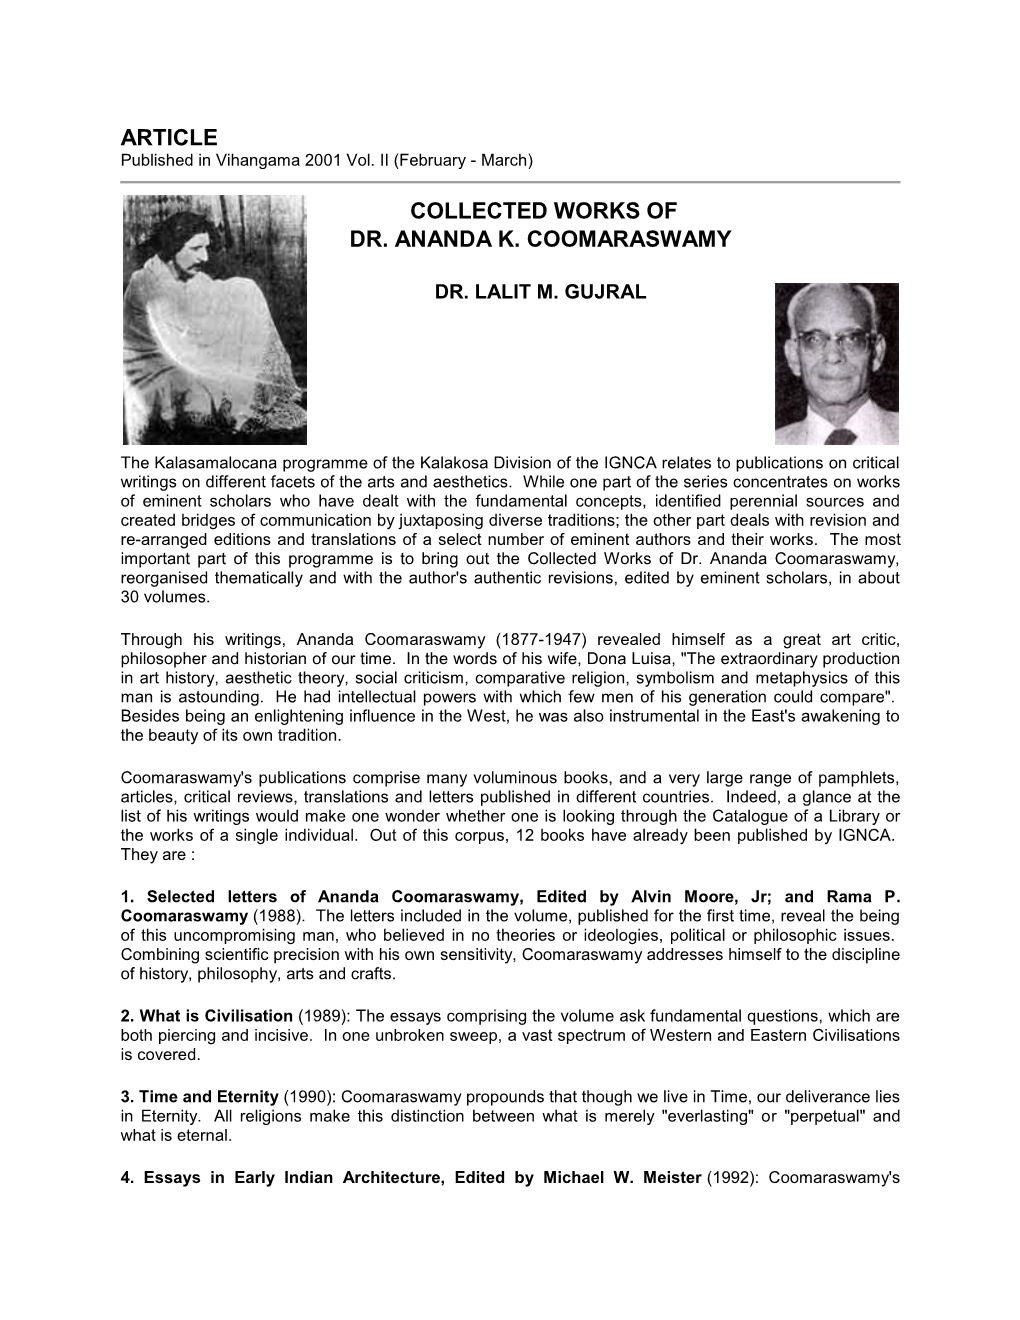 Article Collected Works of Dr. Ananda K. Coomaraswamy